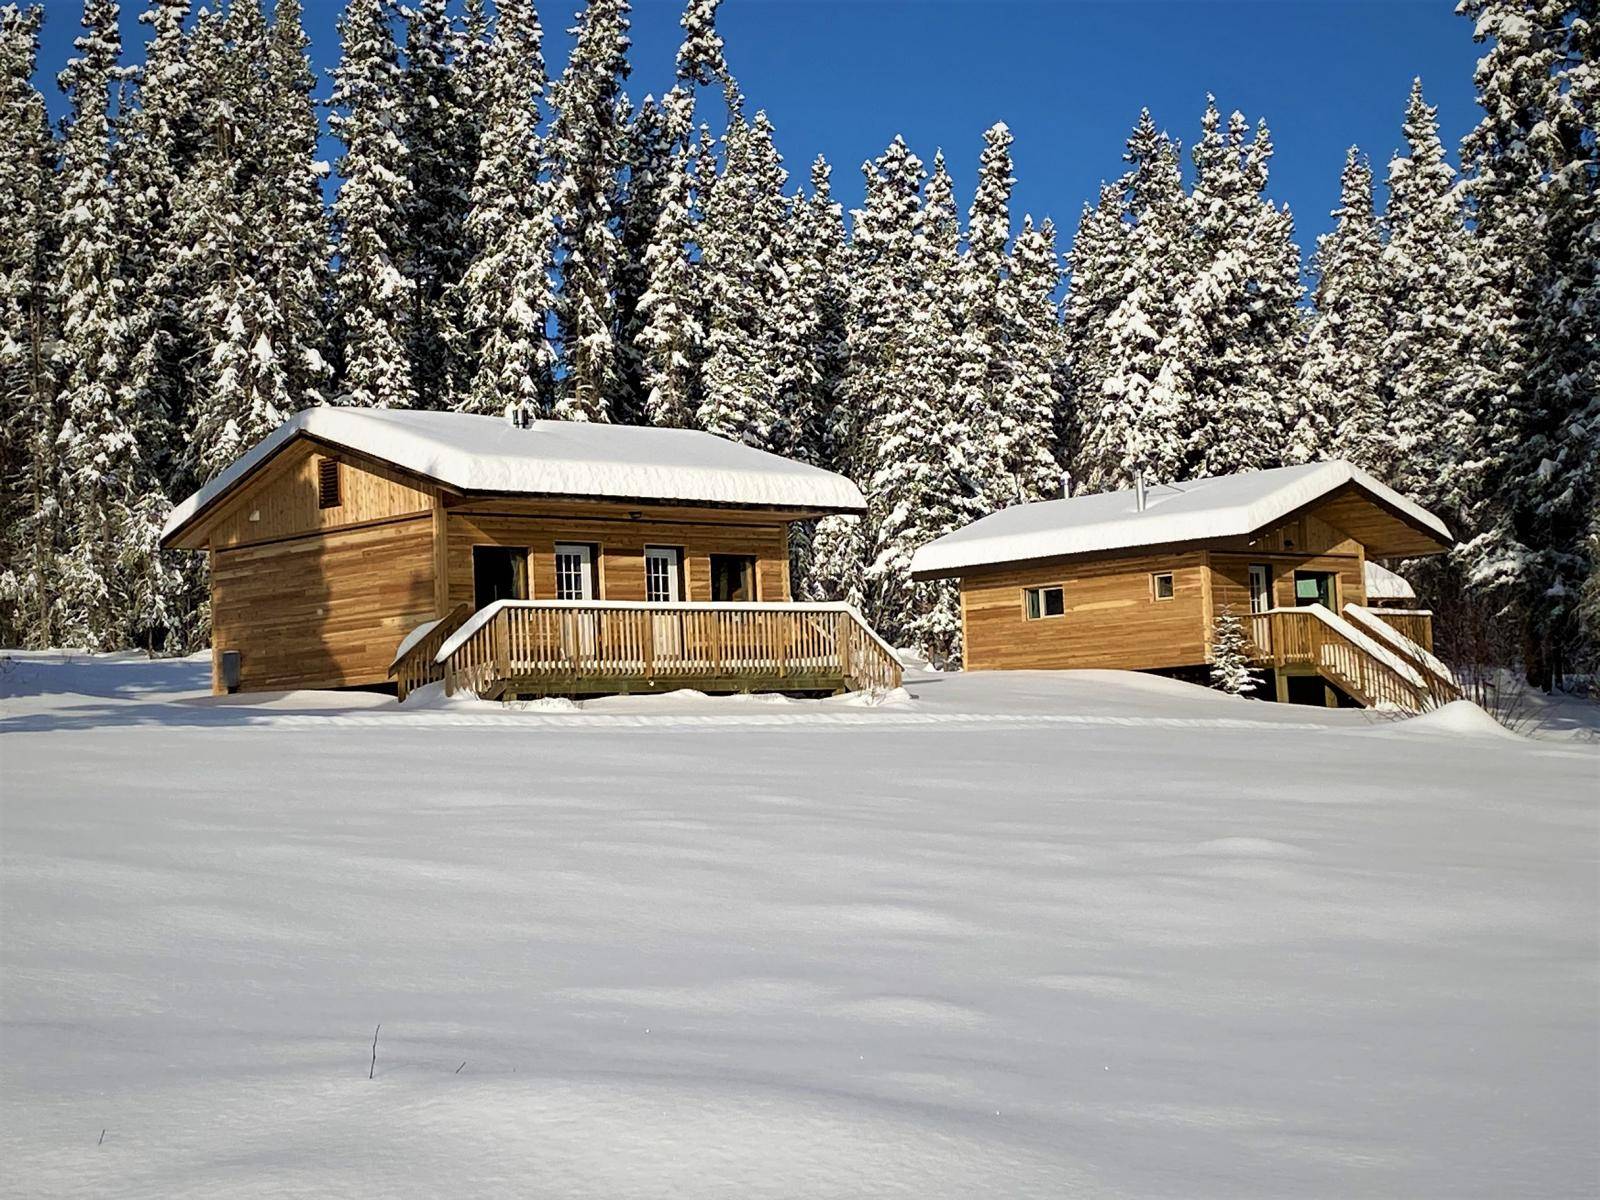 Two cabins in deep snow